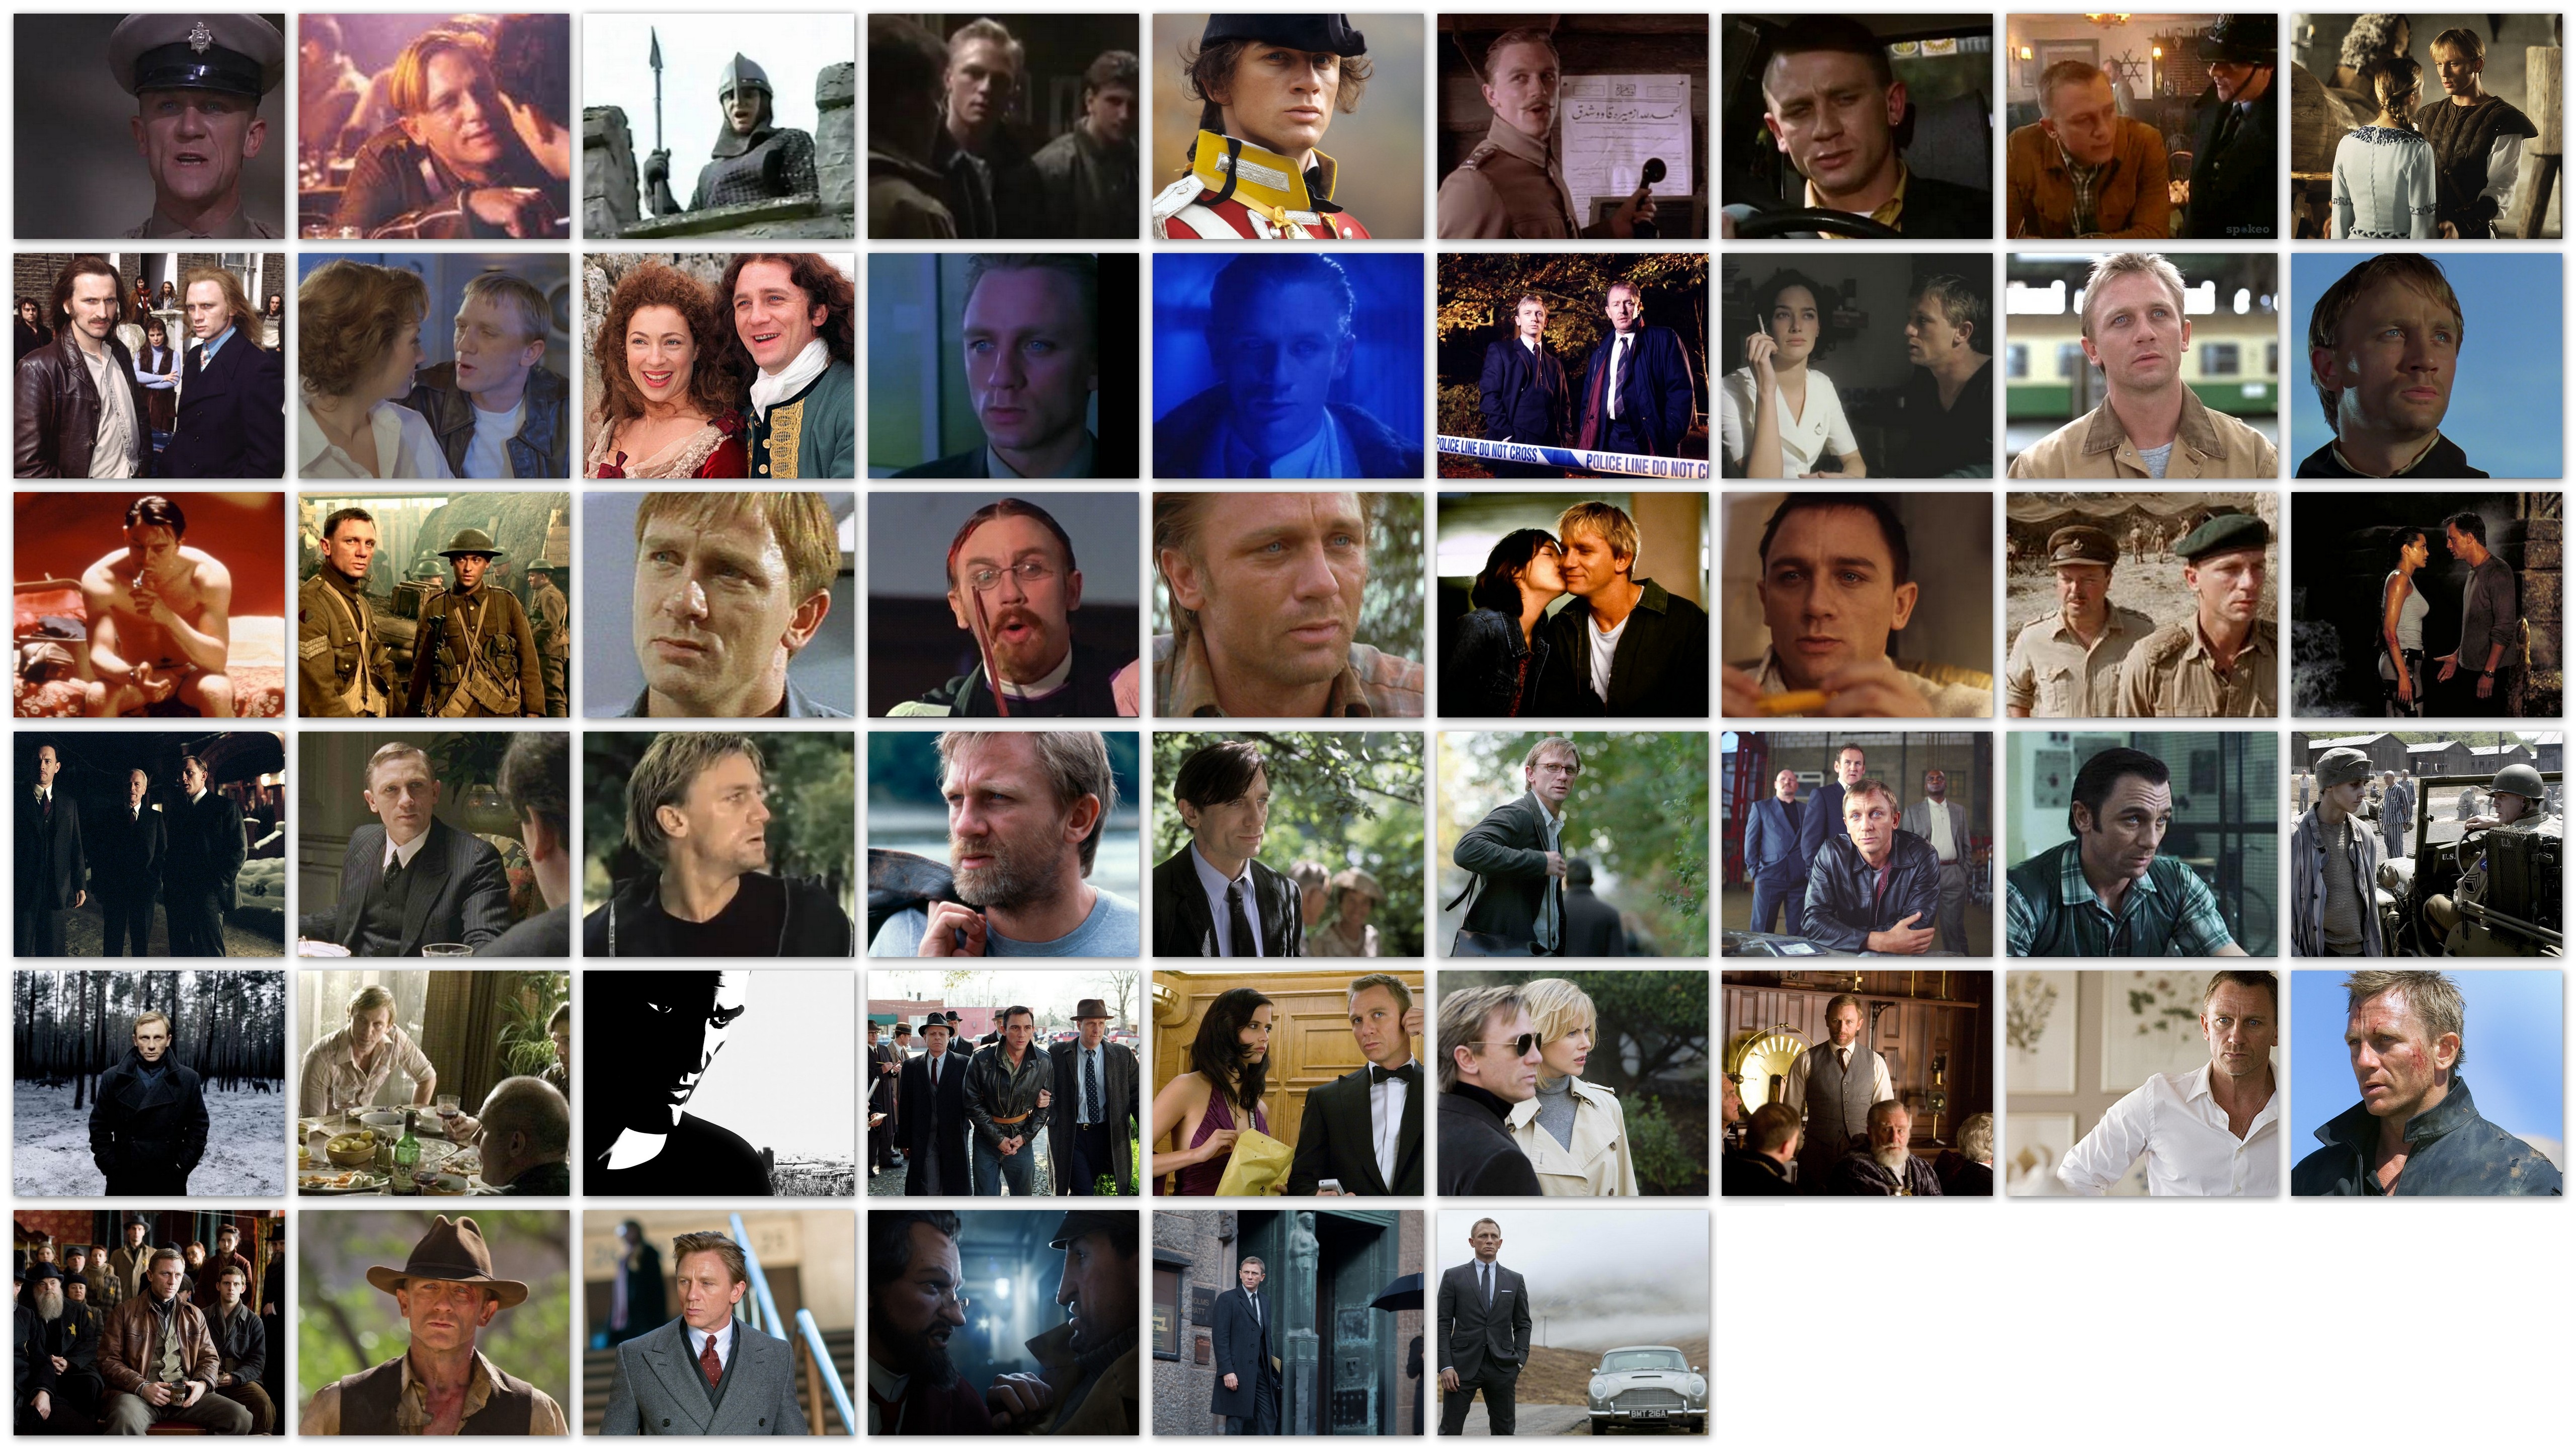 Overview of the roles of Daniel Craig movies